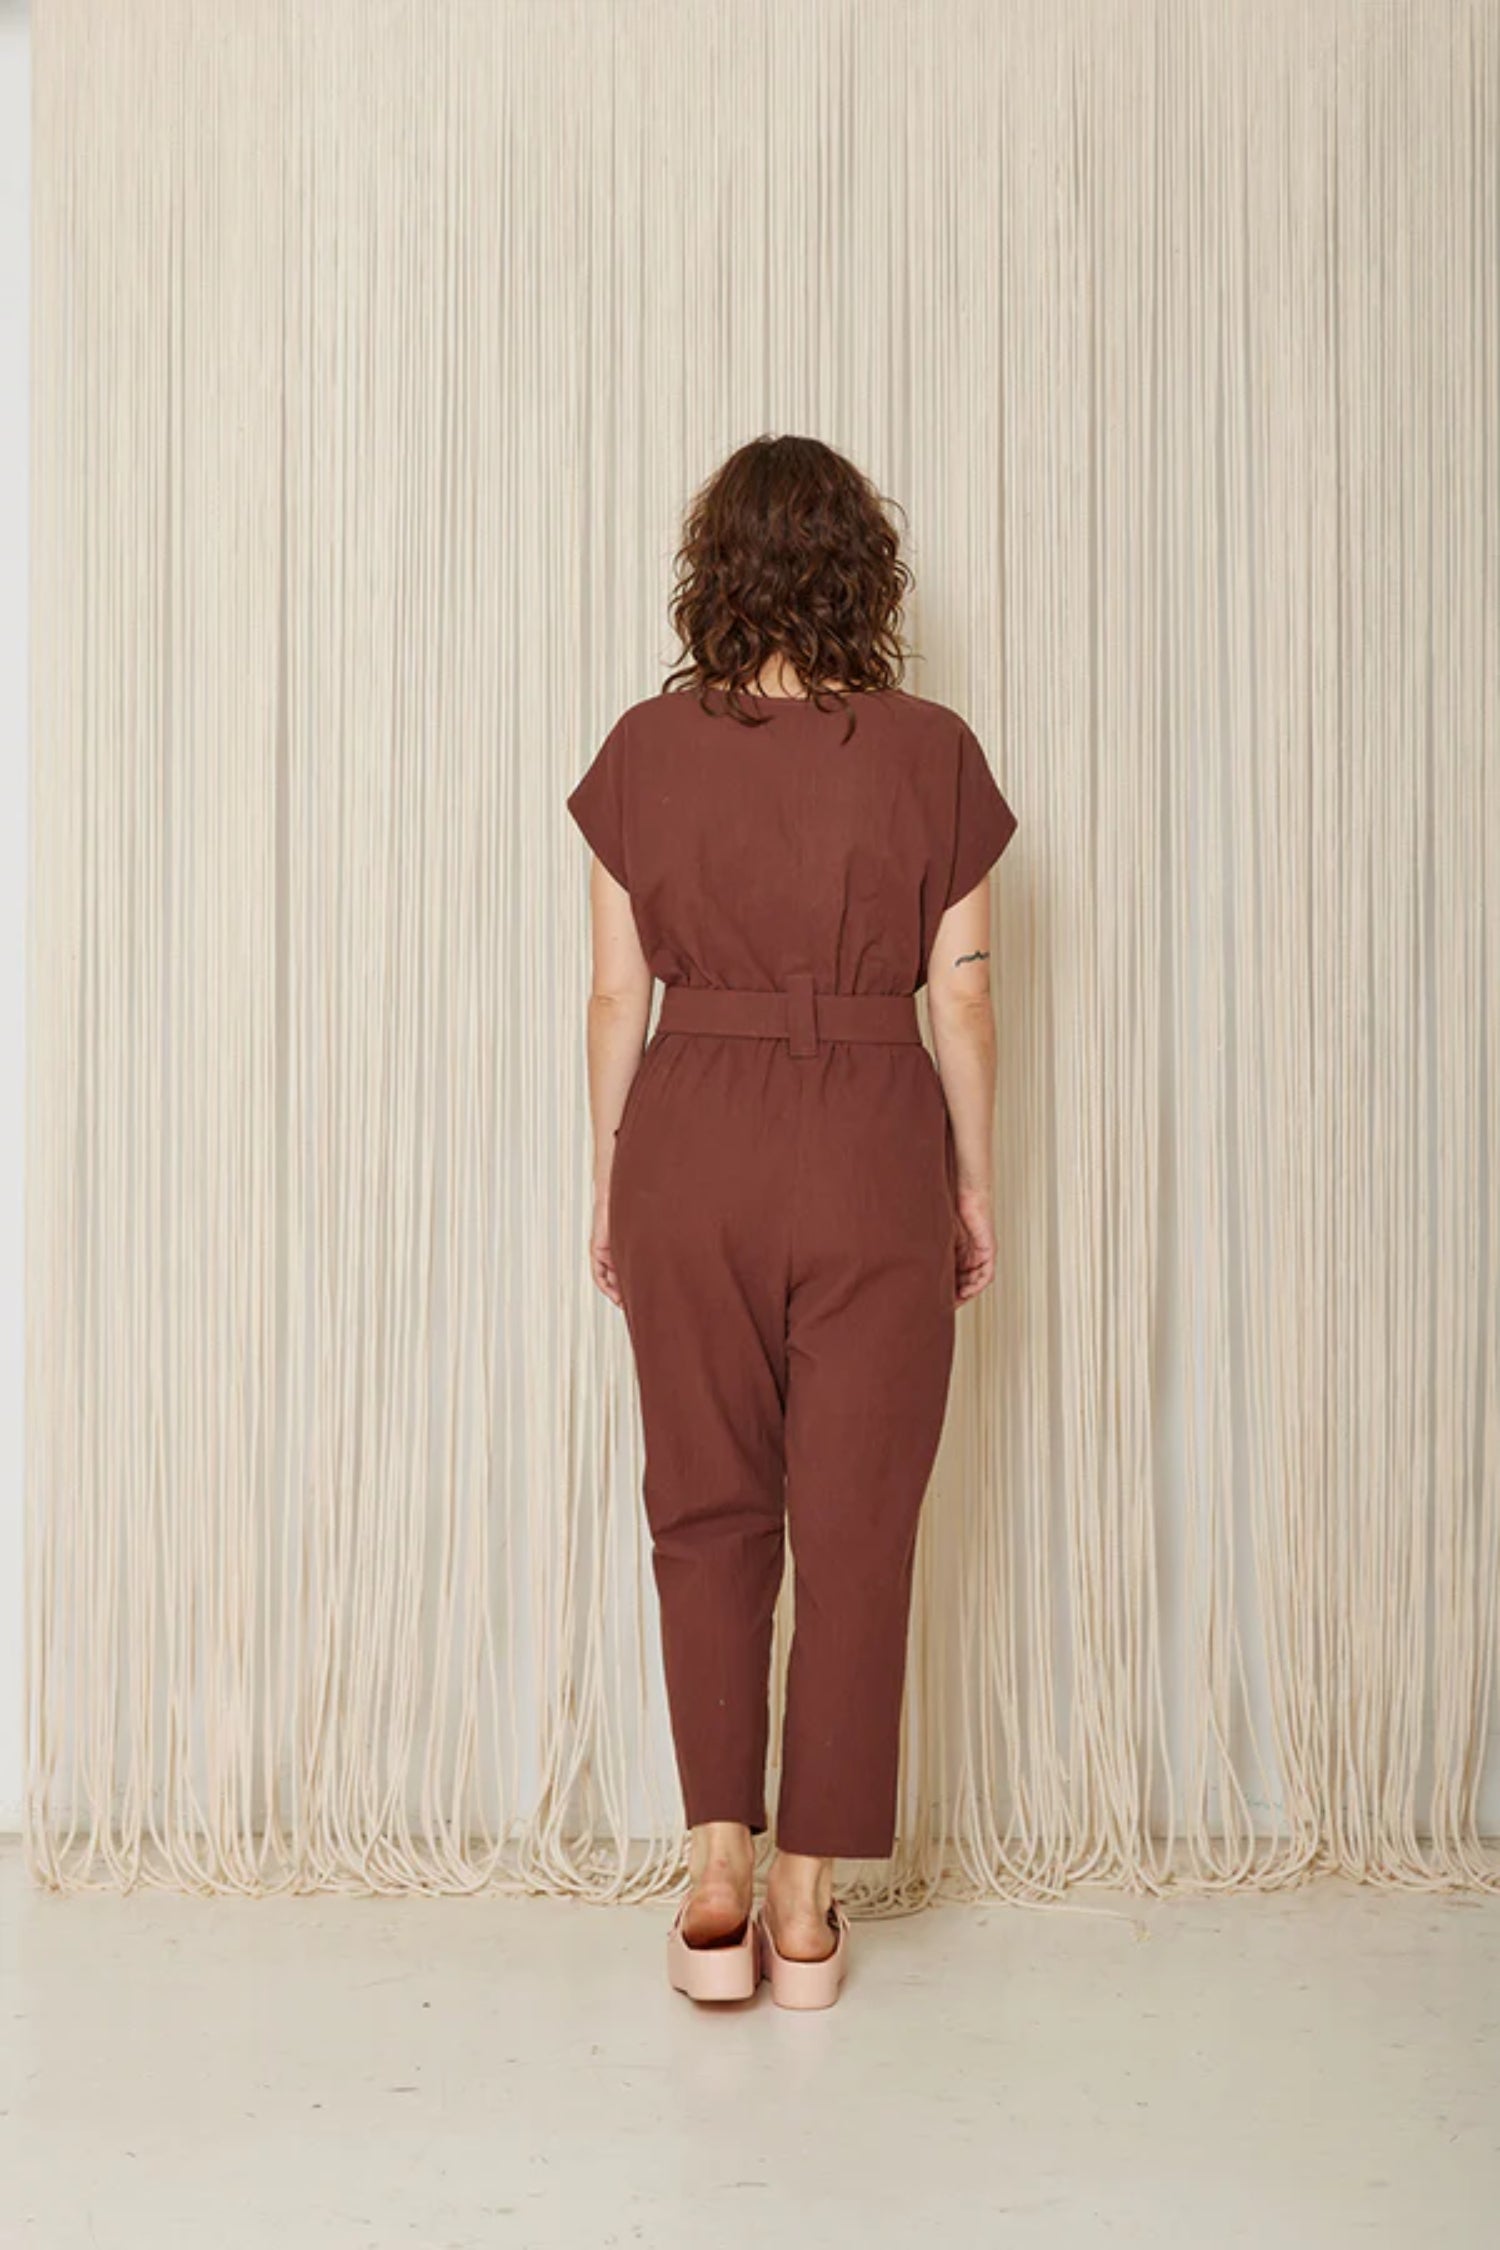 Arnica Jumpsuit by Cokluch, Sumac, back view, short extended sleeves, round neck, front button placket, loop-buckle belt at waist, ankle-length, eco-fabric, cotton, sizes XS to XL, made in Montreal 